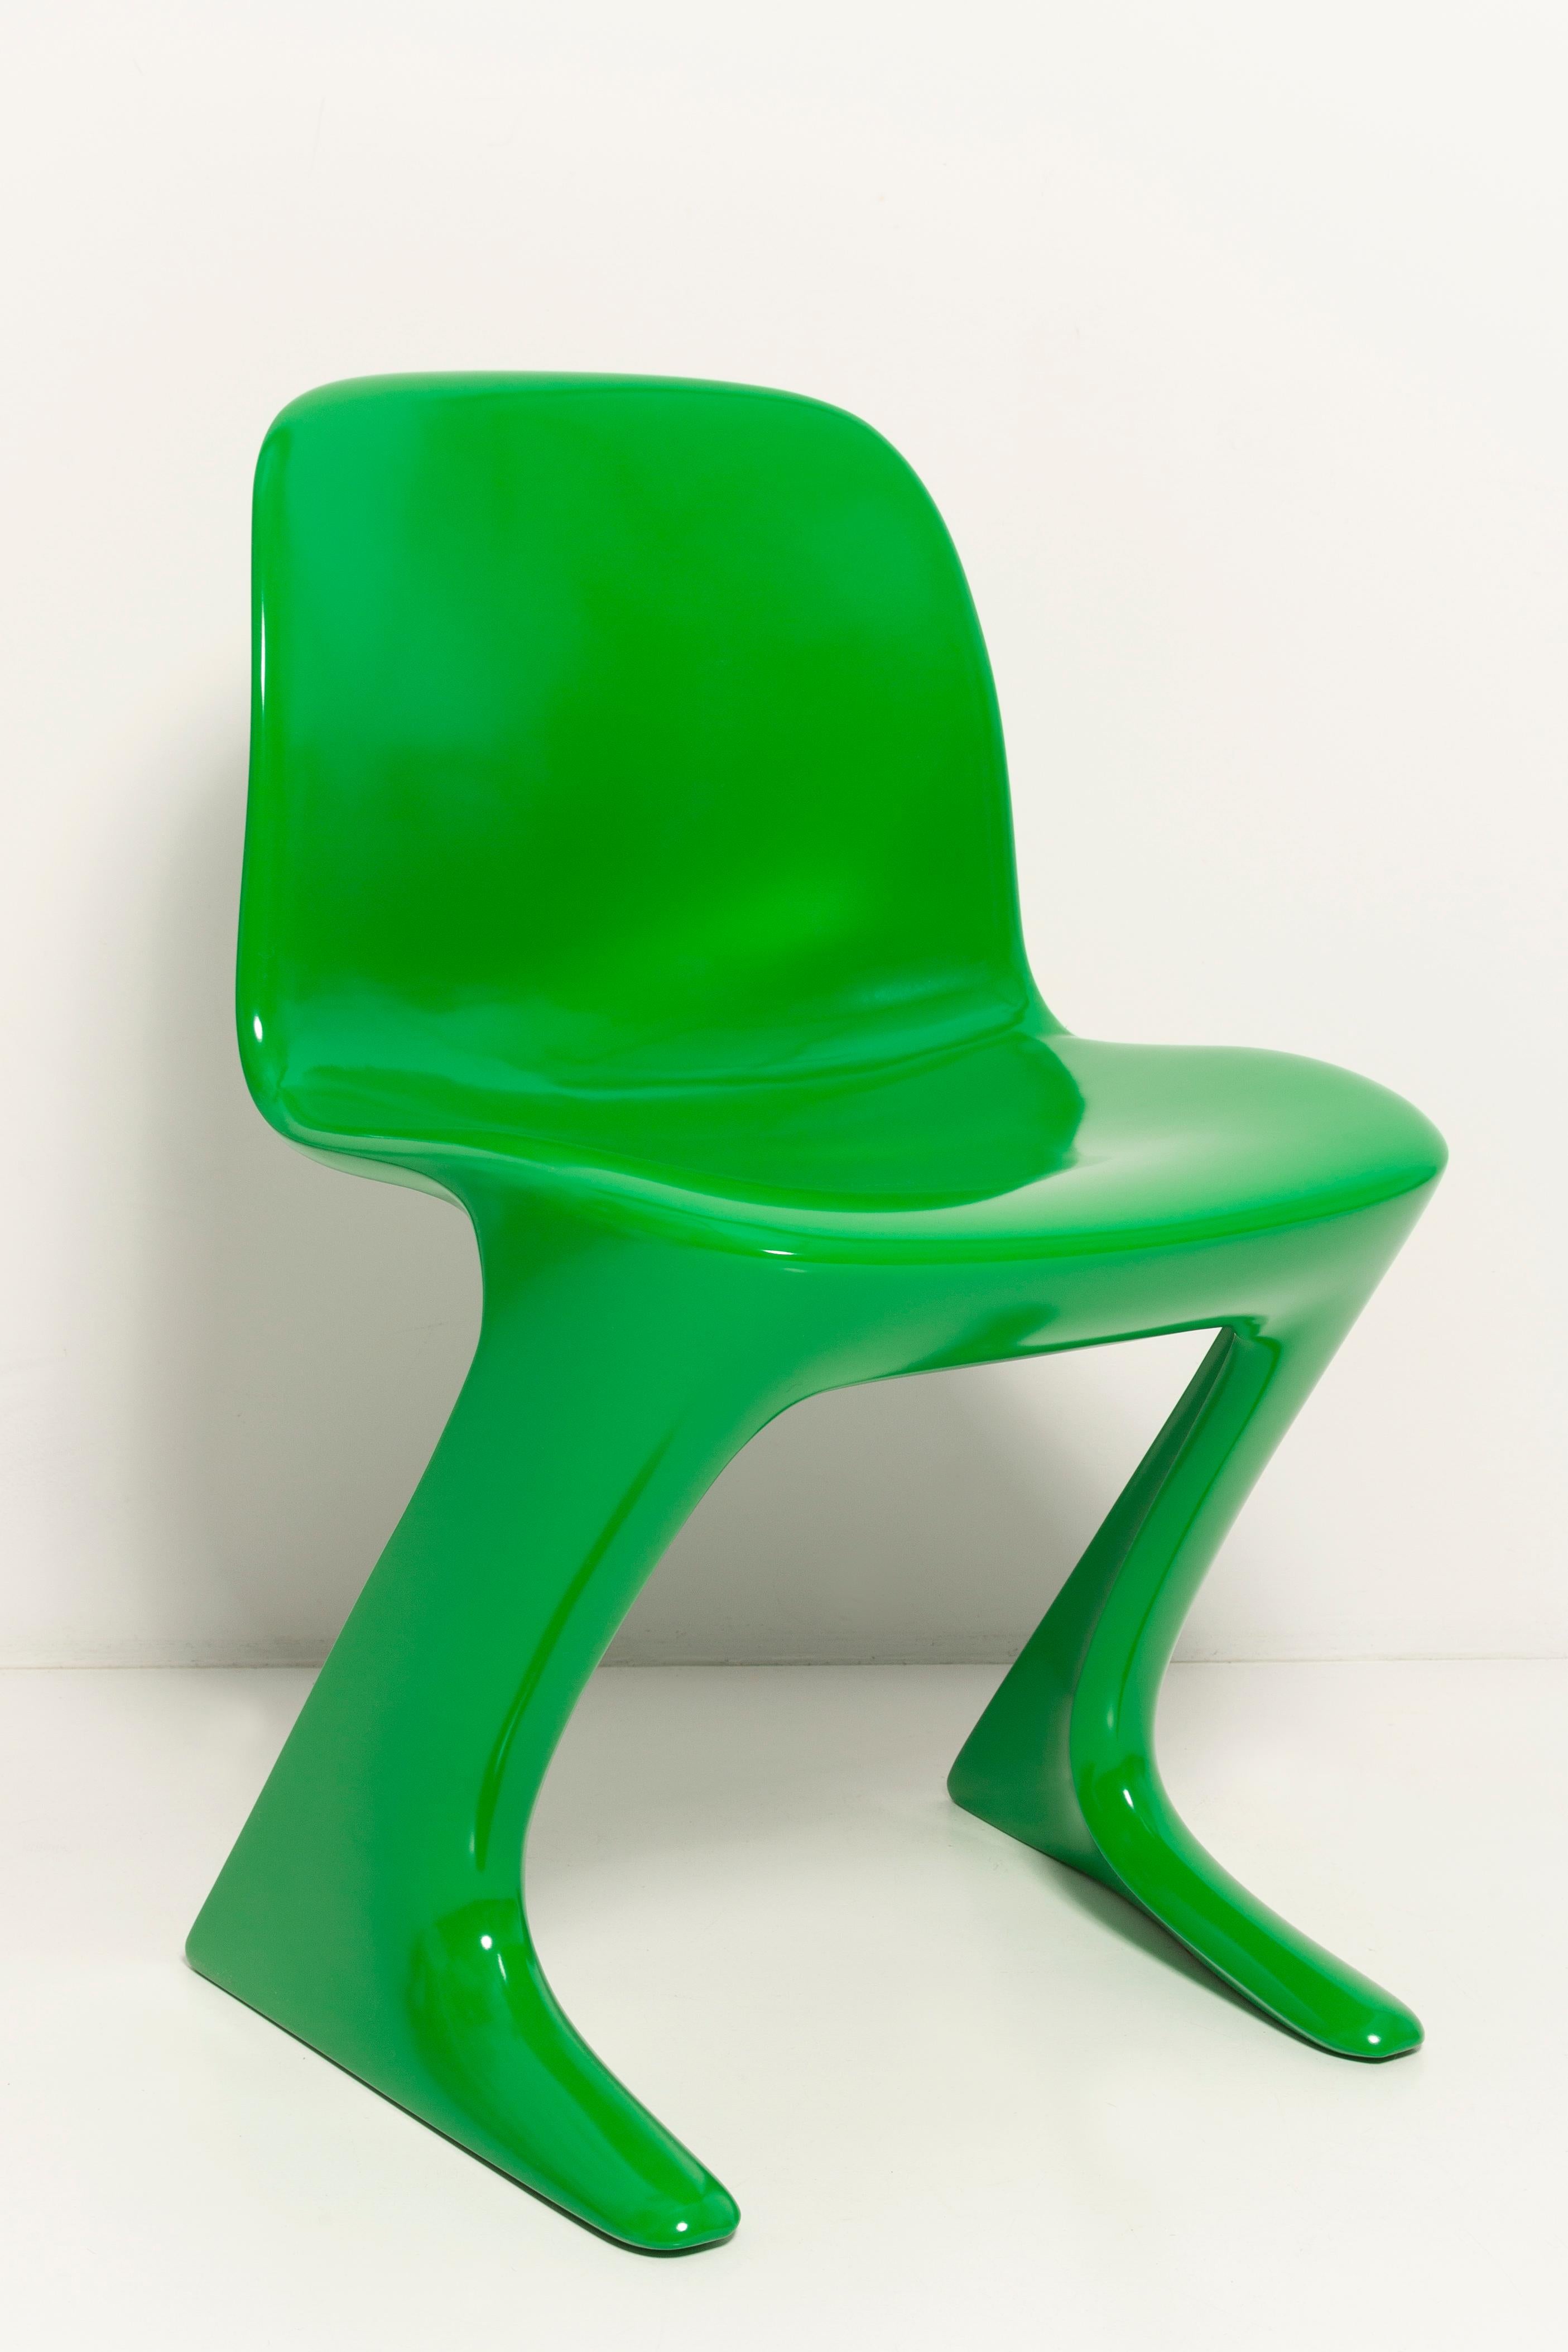 Lacquered Set of Four Green Kangaroo Chairs Designed by Ernst Moeckl, Germany, 1960s For Sale